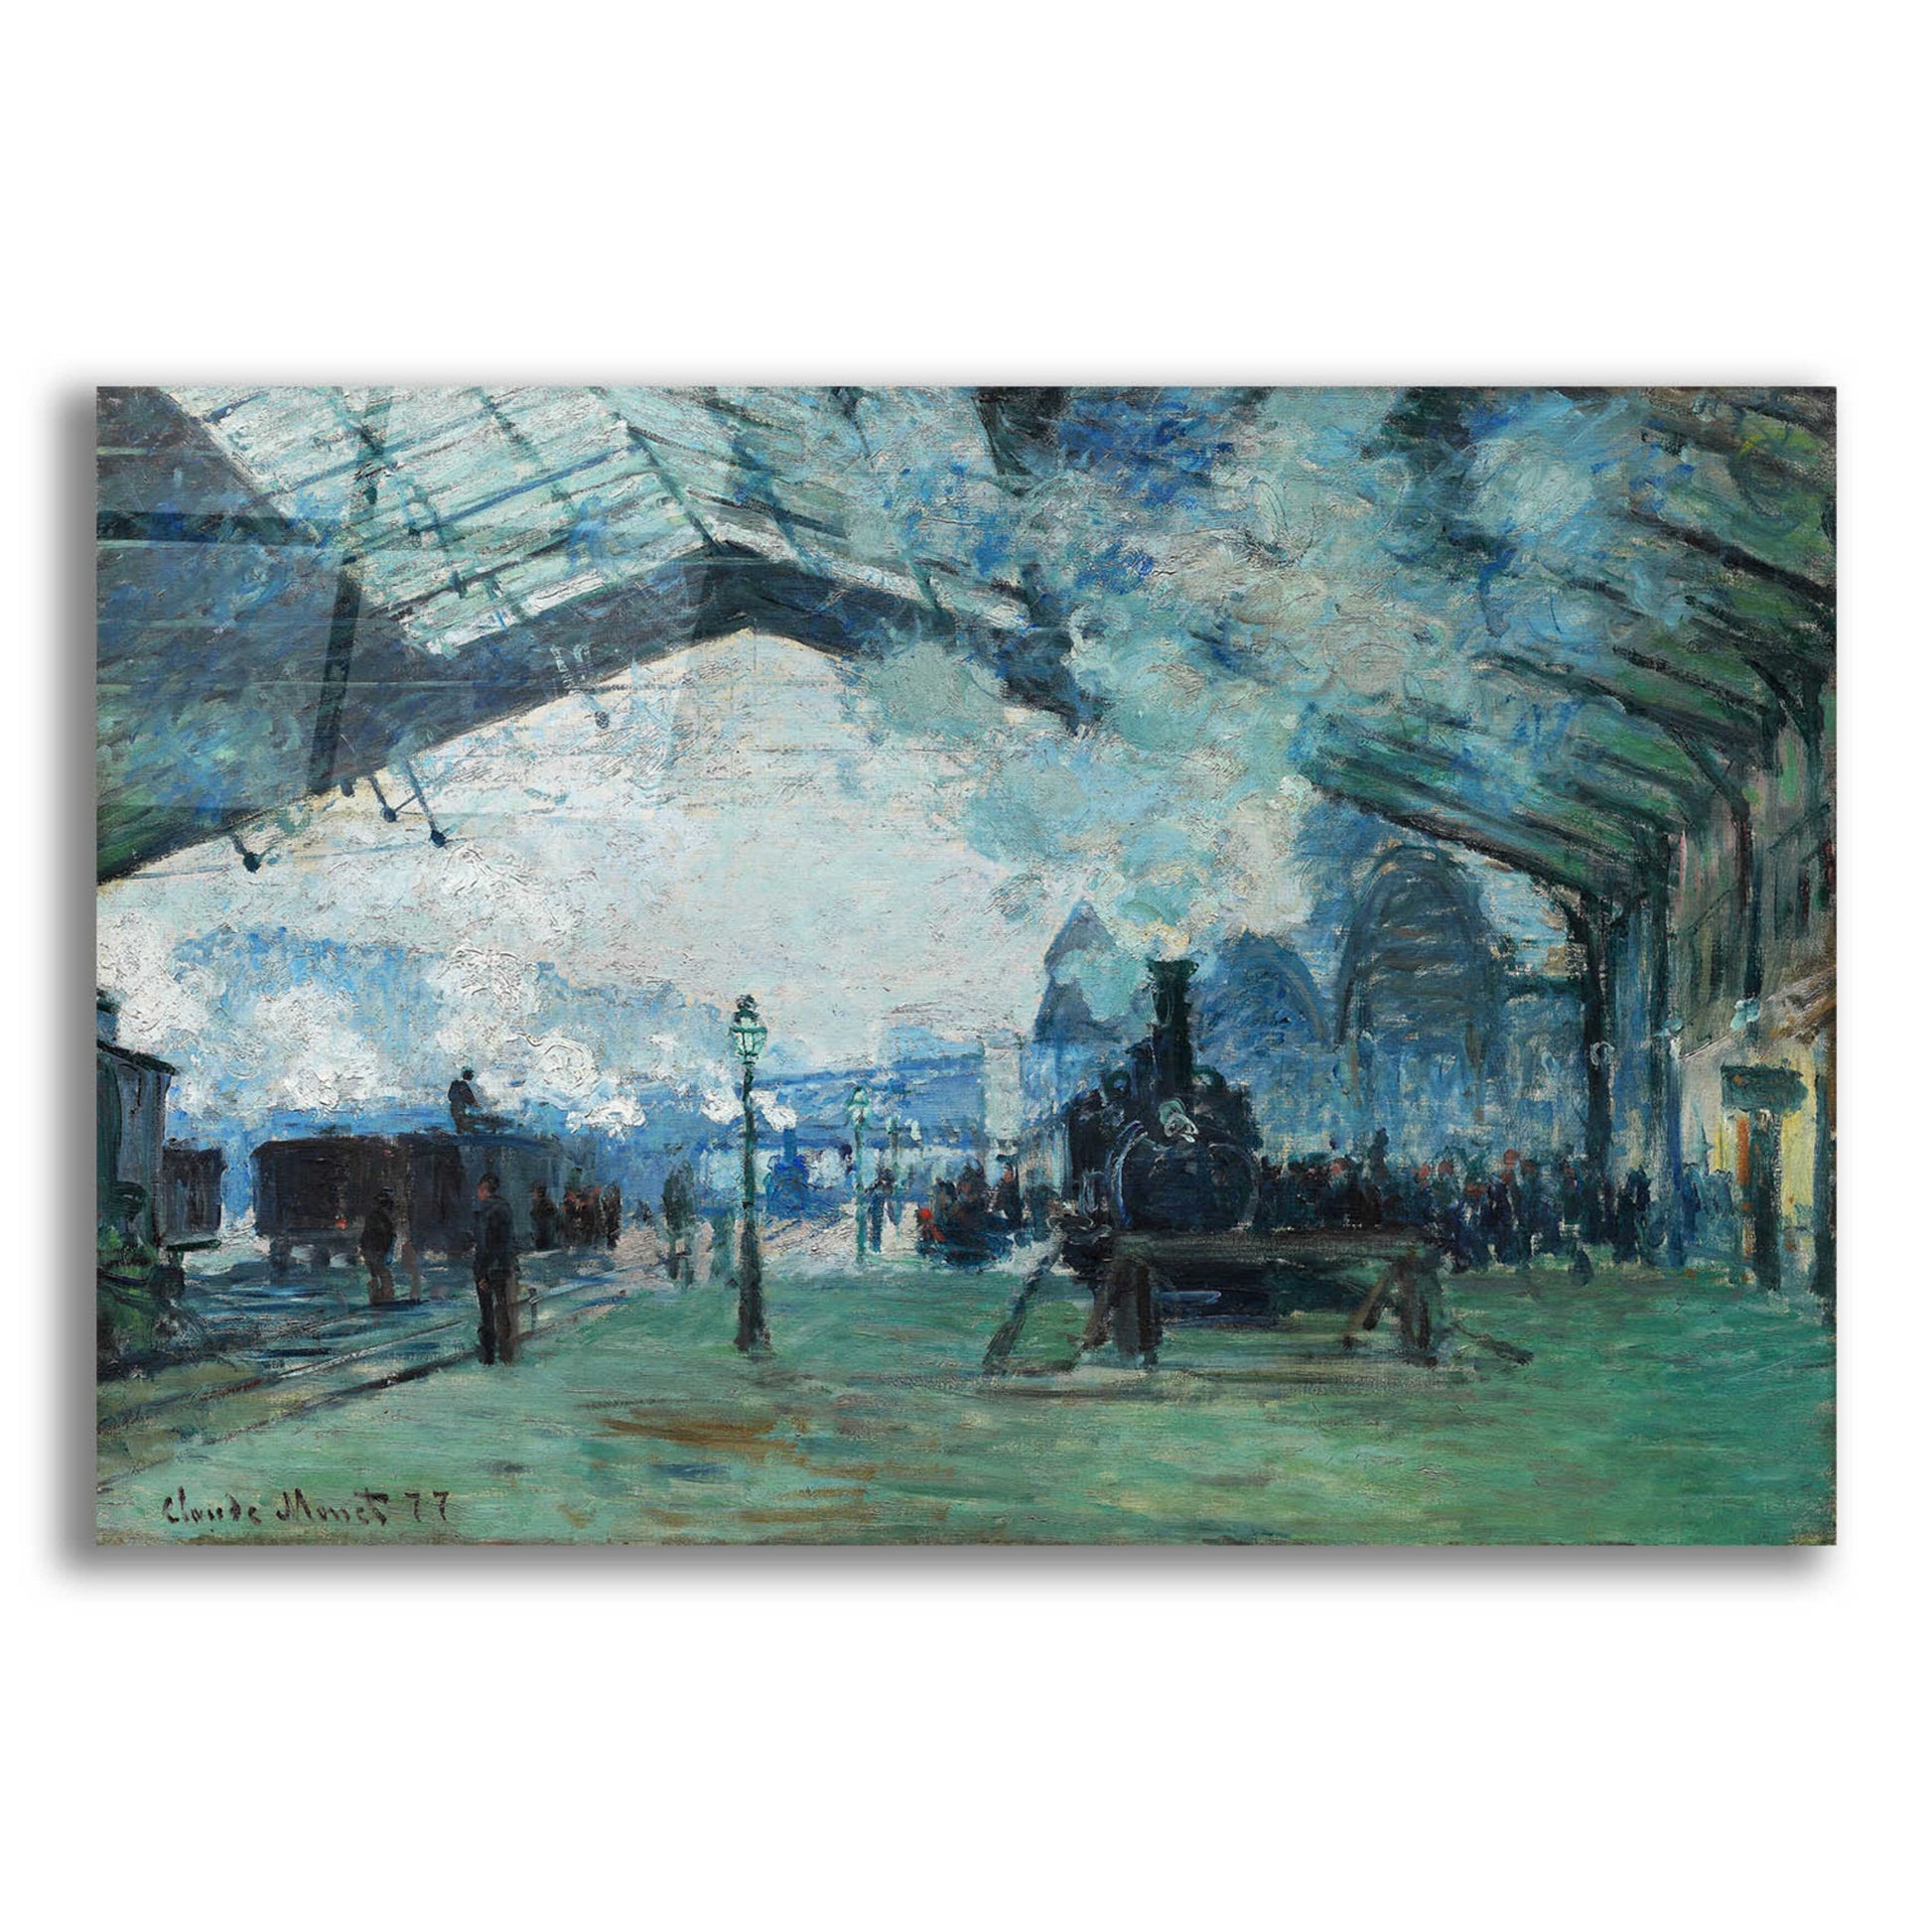 Epic Art 'Ariival Of The Normandy Train' by Claude Monet, Acrylic Glass Wall Art,16x12